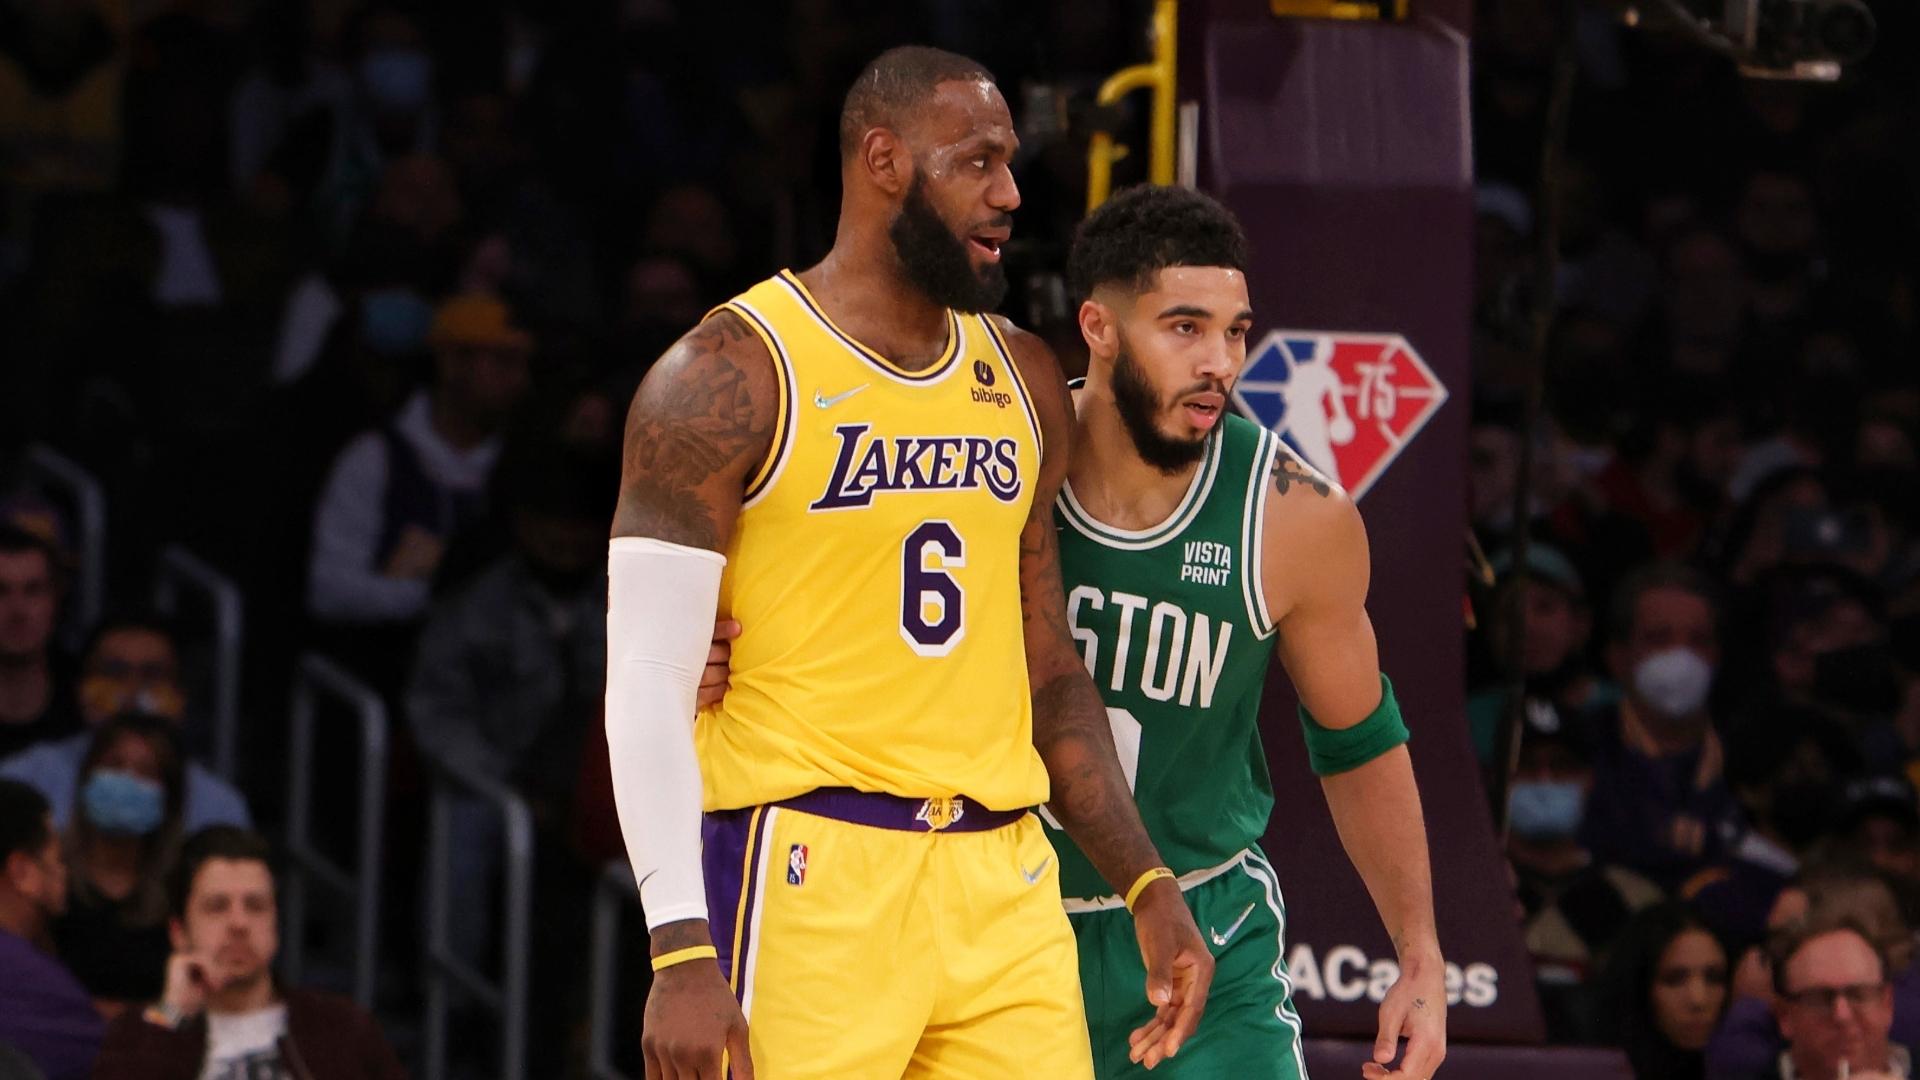 How to watch LeBron James vs. Jayson Tatum: TV channel, live stream, time  for Lakers vs. Celtics Tuesday NBA game | Sporting News